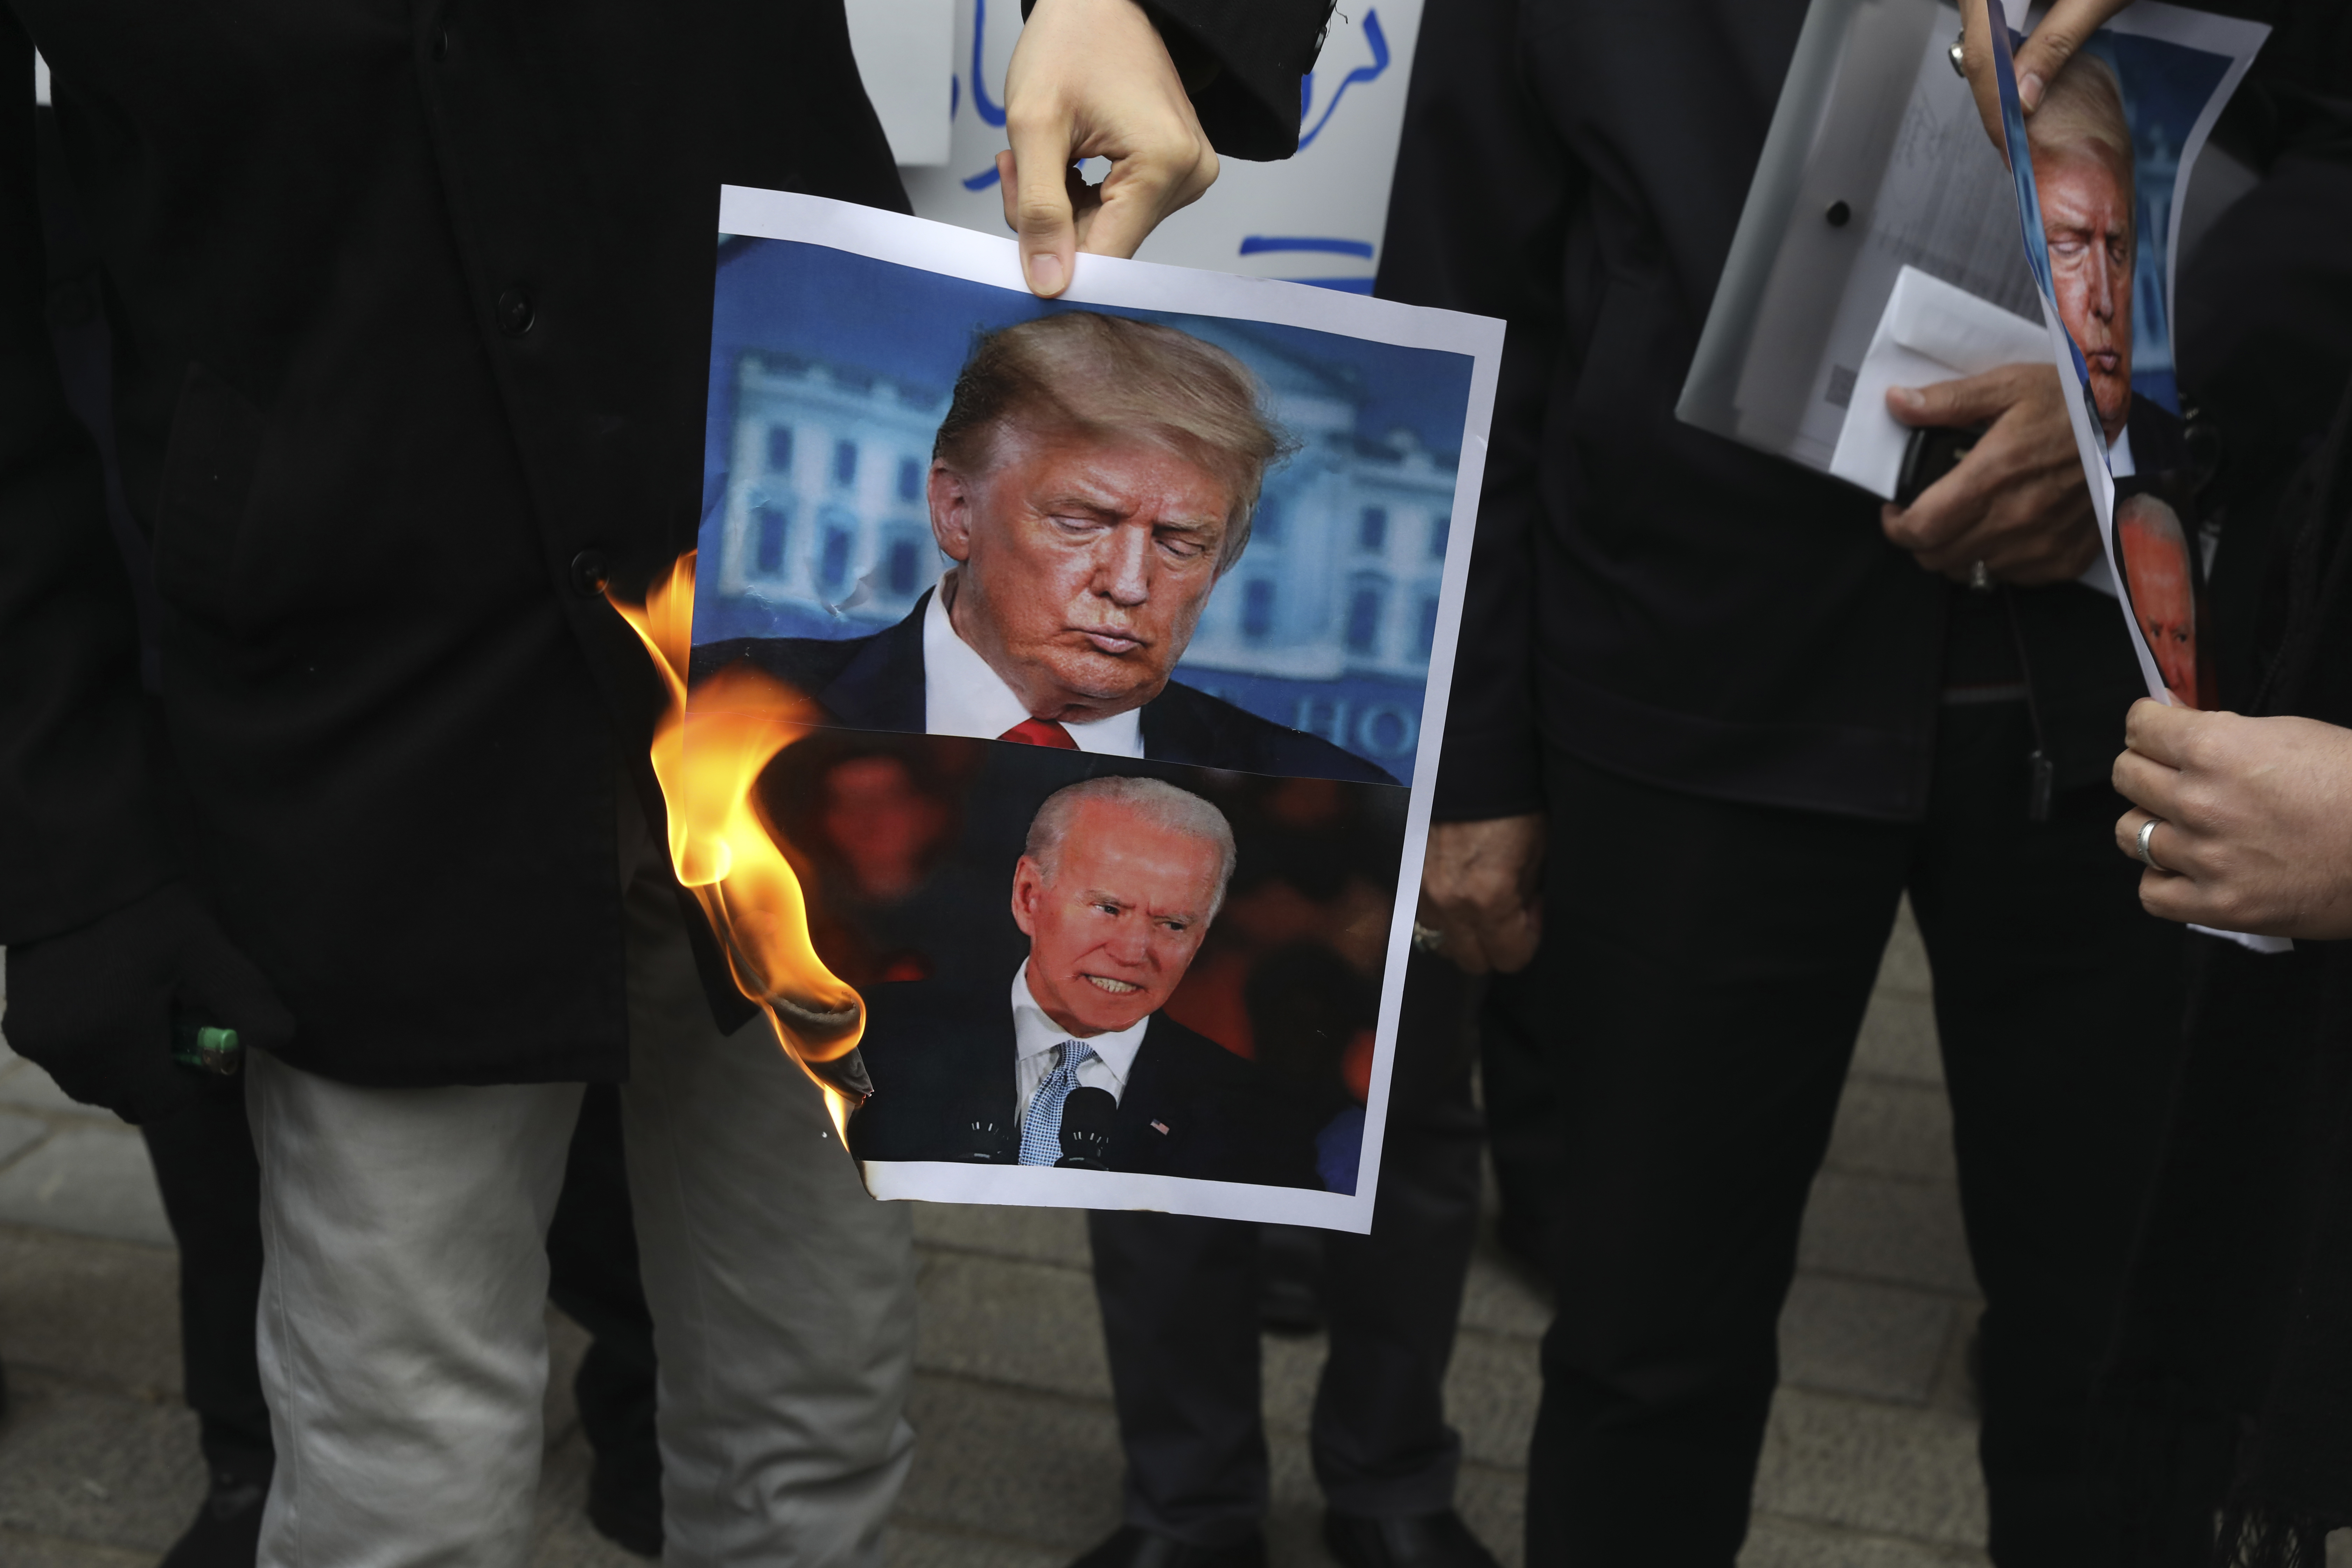 A group of protesters burn pictures of the U.S. President Donald Trump, top, and the President-elect Joe Biden in a gathering in front of Iranian Foreign Ministry on Saturday, Nov. 28, 2020, a day after the killing of Mohsen Fakhrizadeh an Iranian scientist linked to the country's nuclear program by unknown assailants near Tehran. Photo: AP